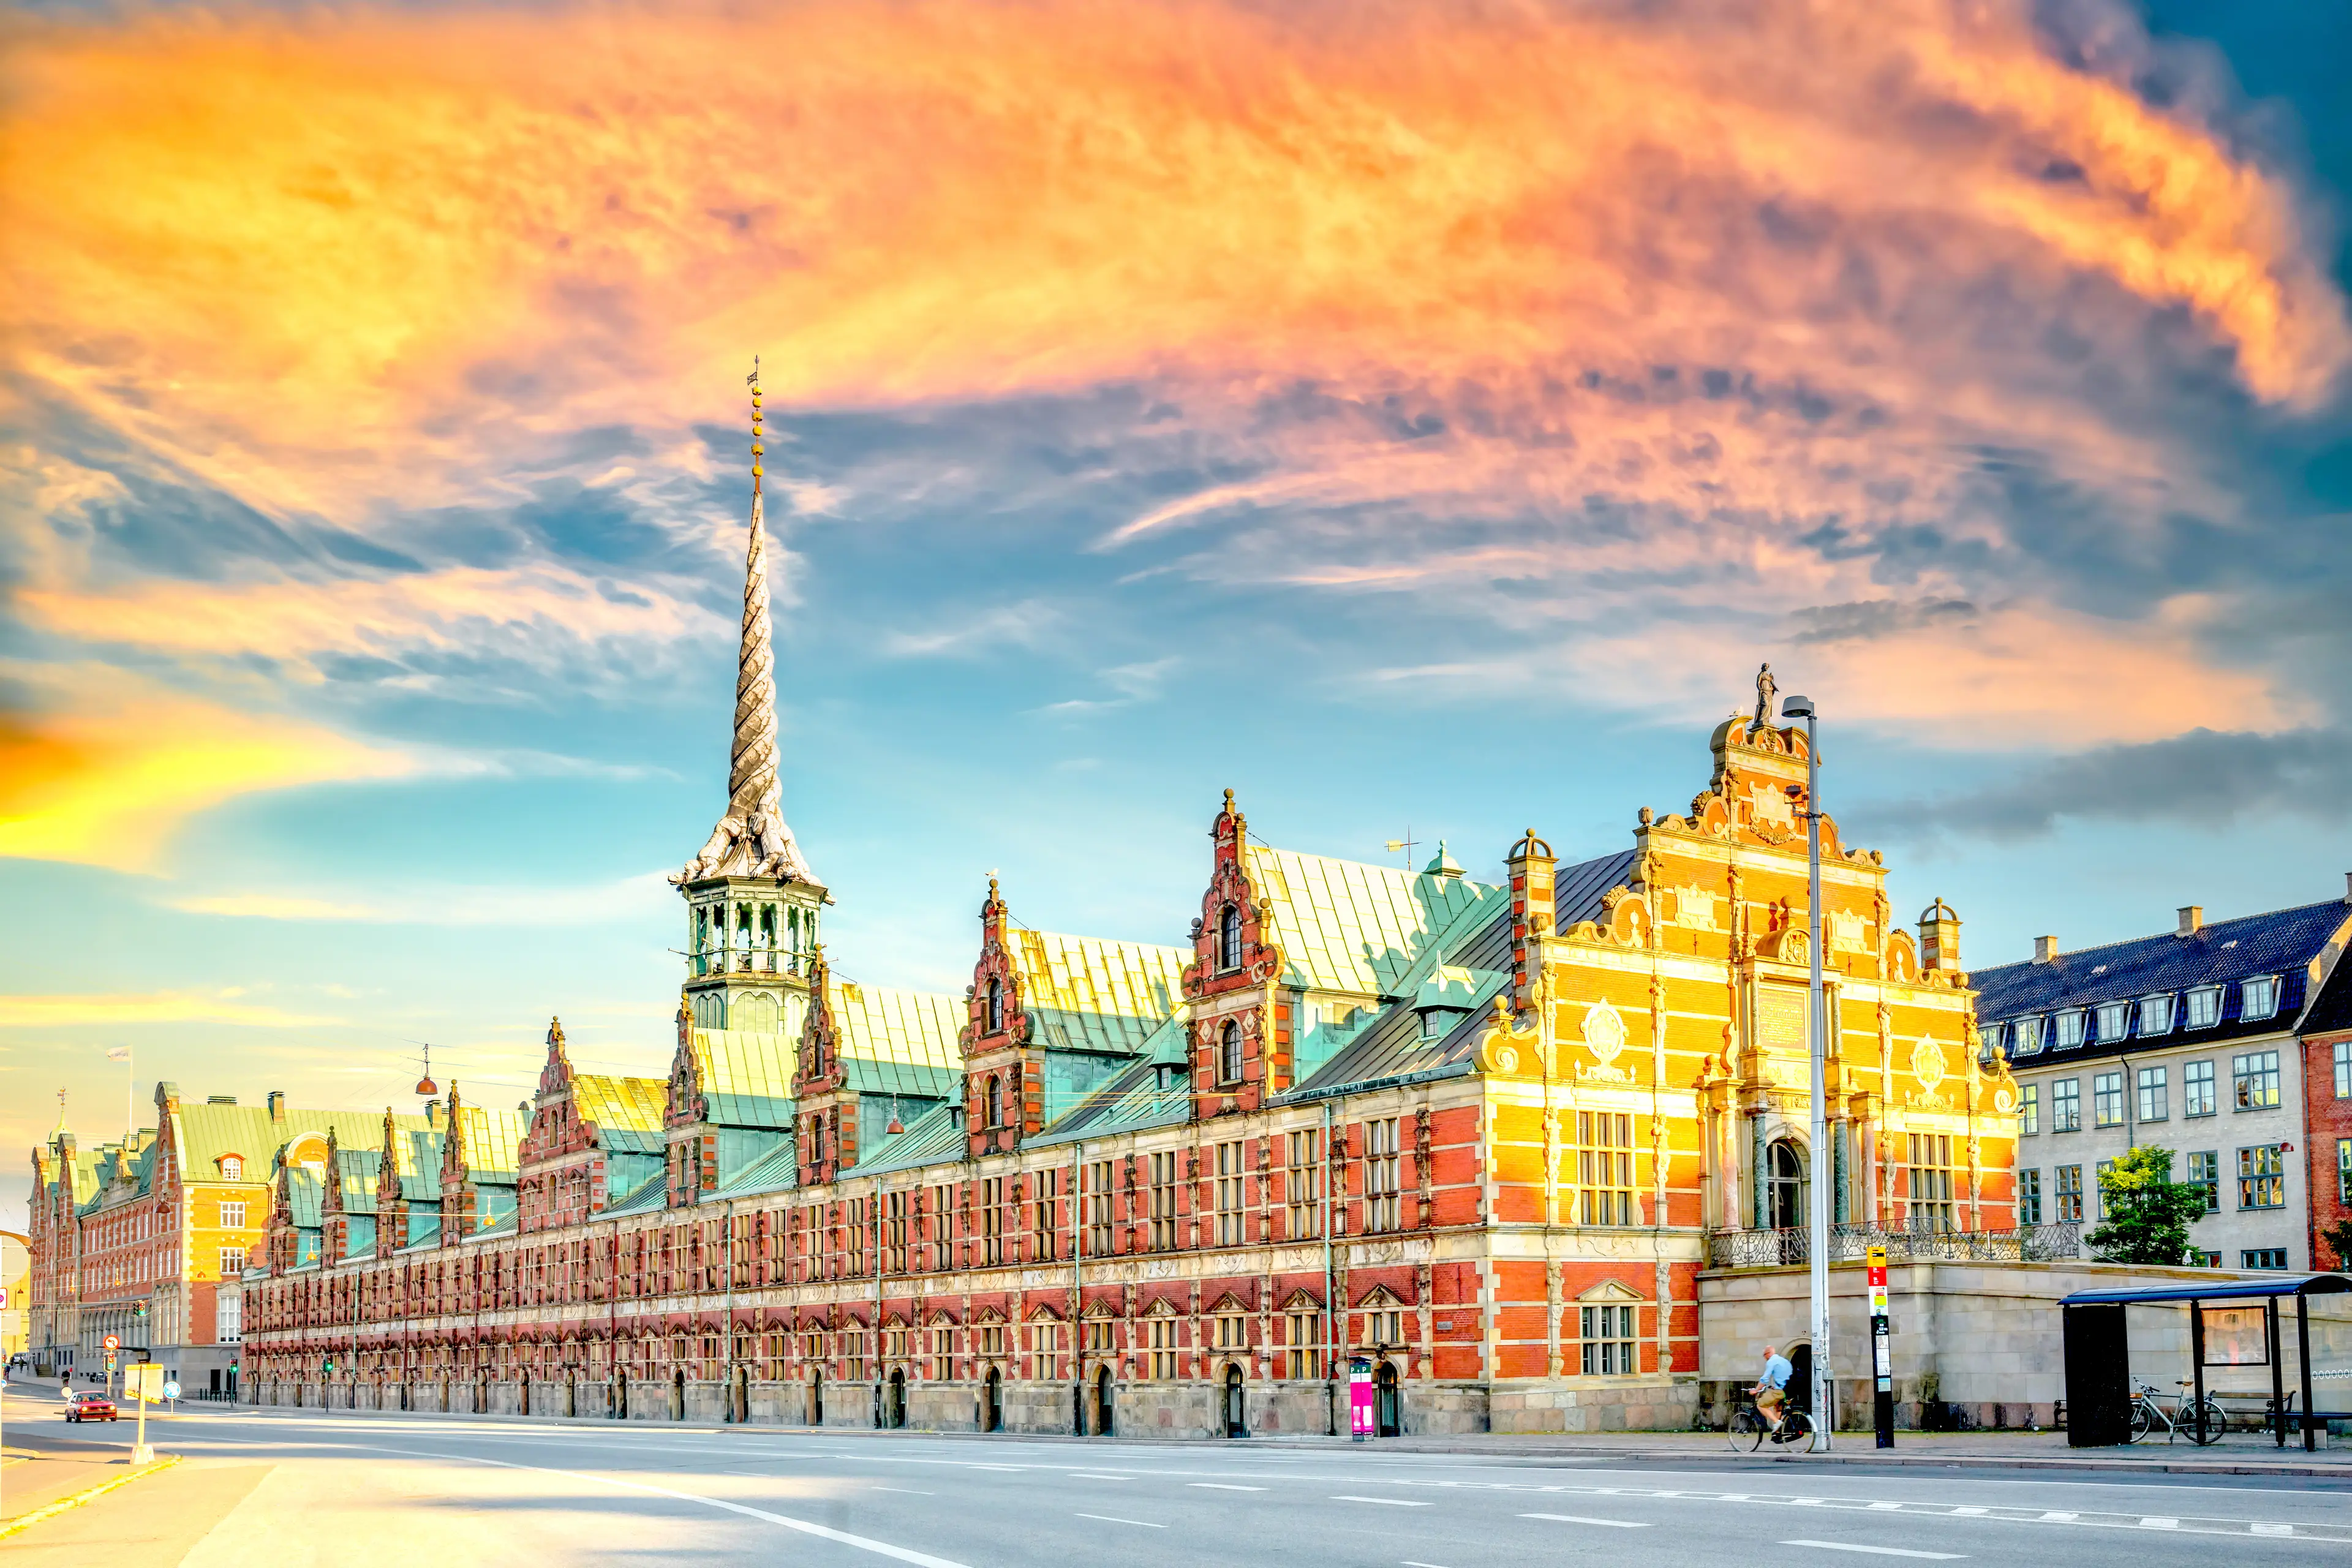 2-Day Family Sightseeing and Relaxation Trip to Copenhagen